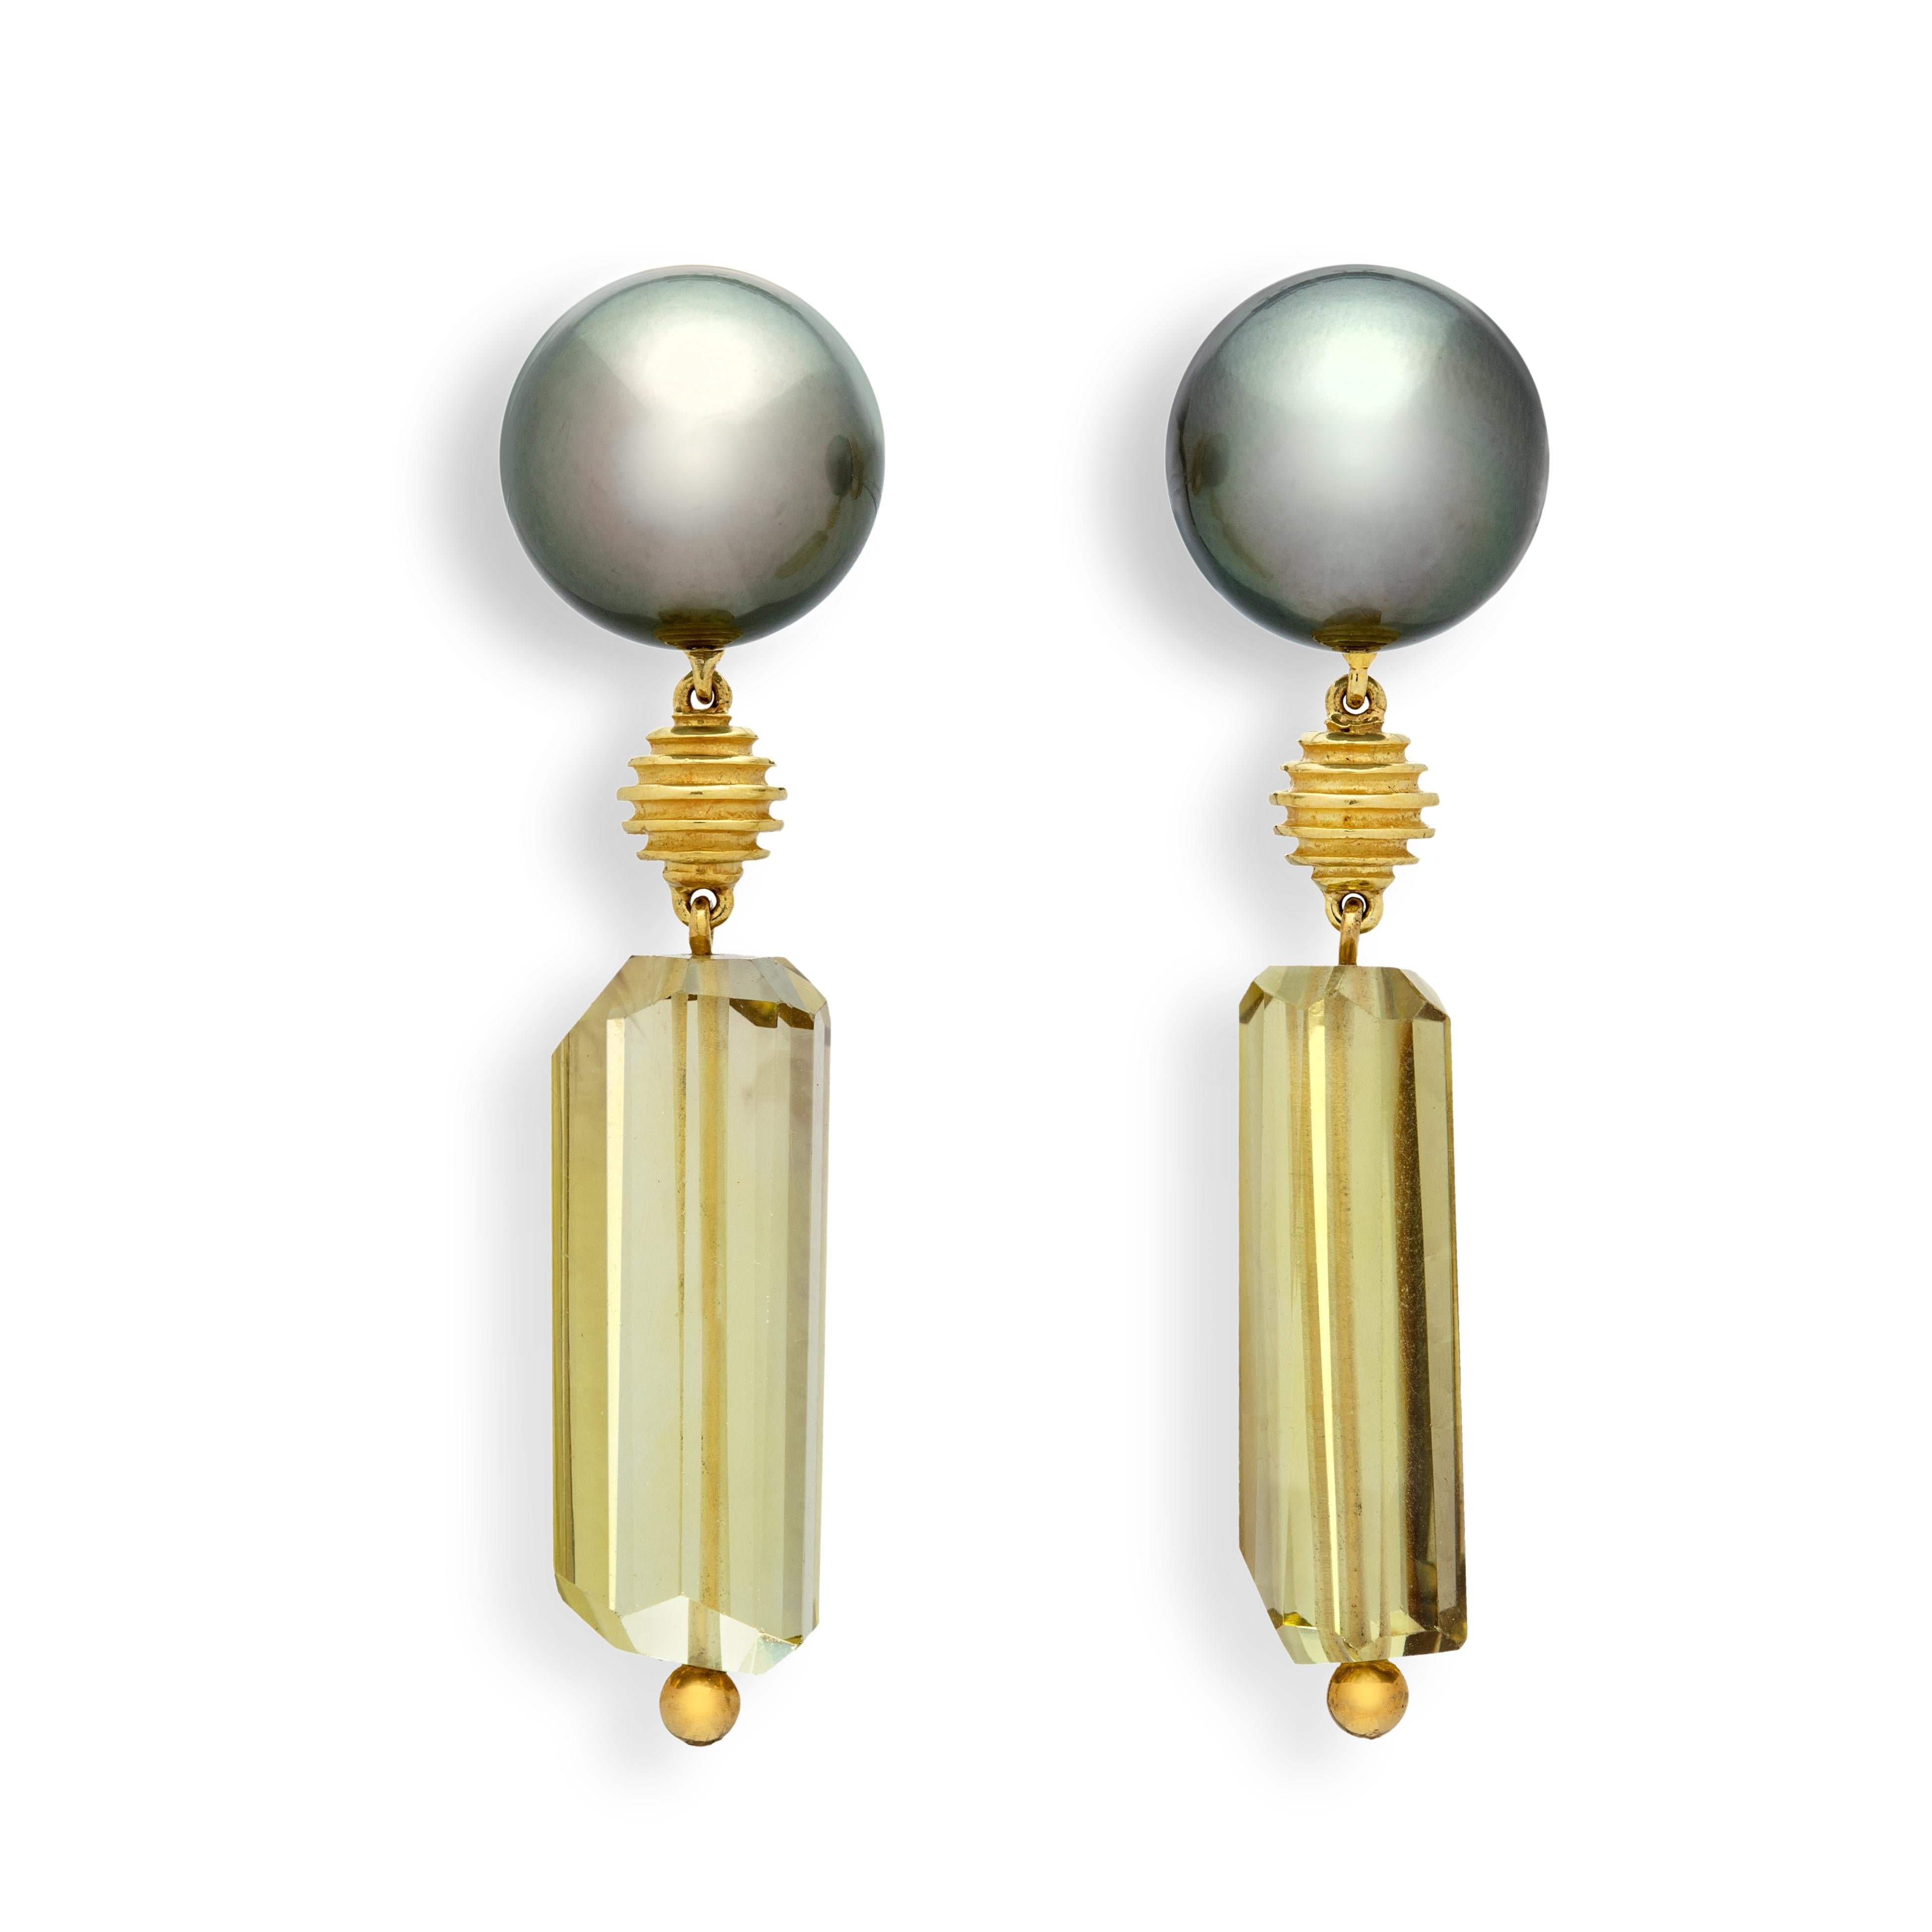 These fun earrings have a futuristic vibe to them that make them so easy to use in any everyday situation. The dark, smooth Tahitian pearls, the carved concentric 18k yellow gold circles, and the bright and clear prasiolite faceted bars make for a